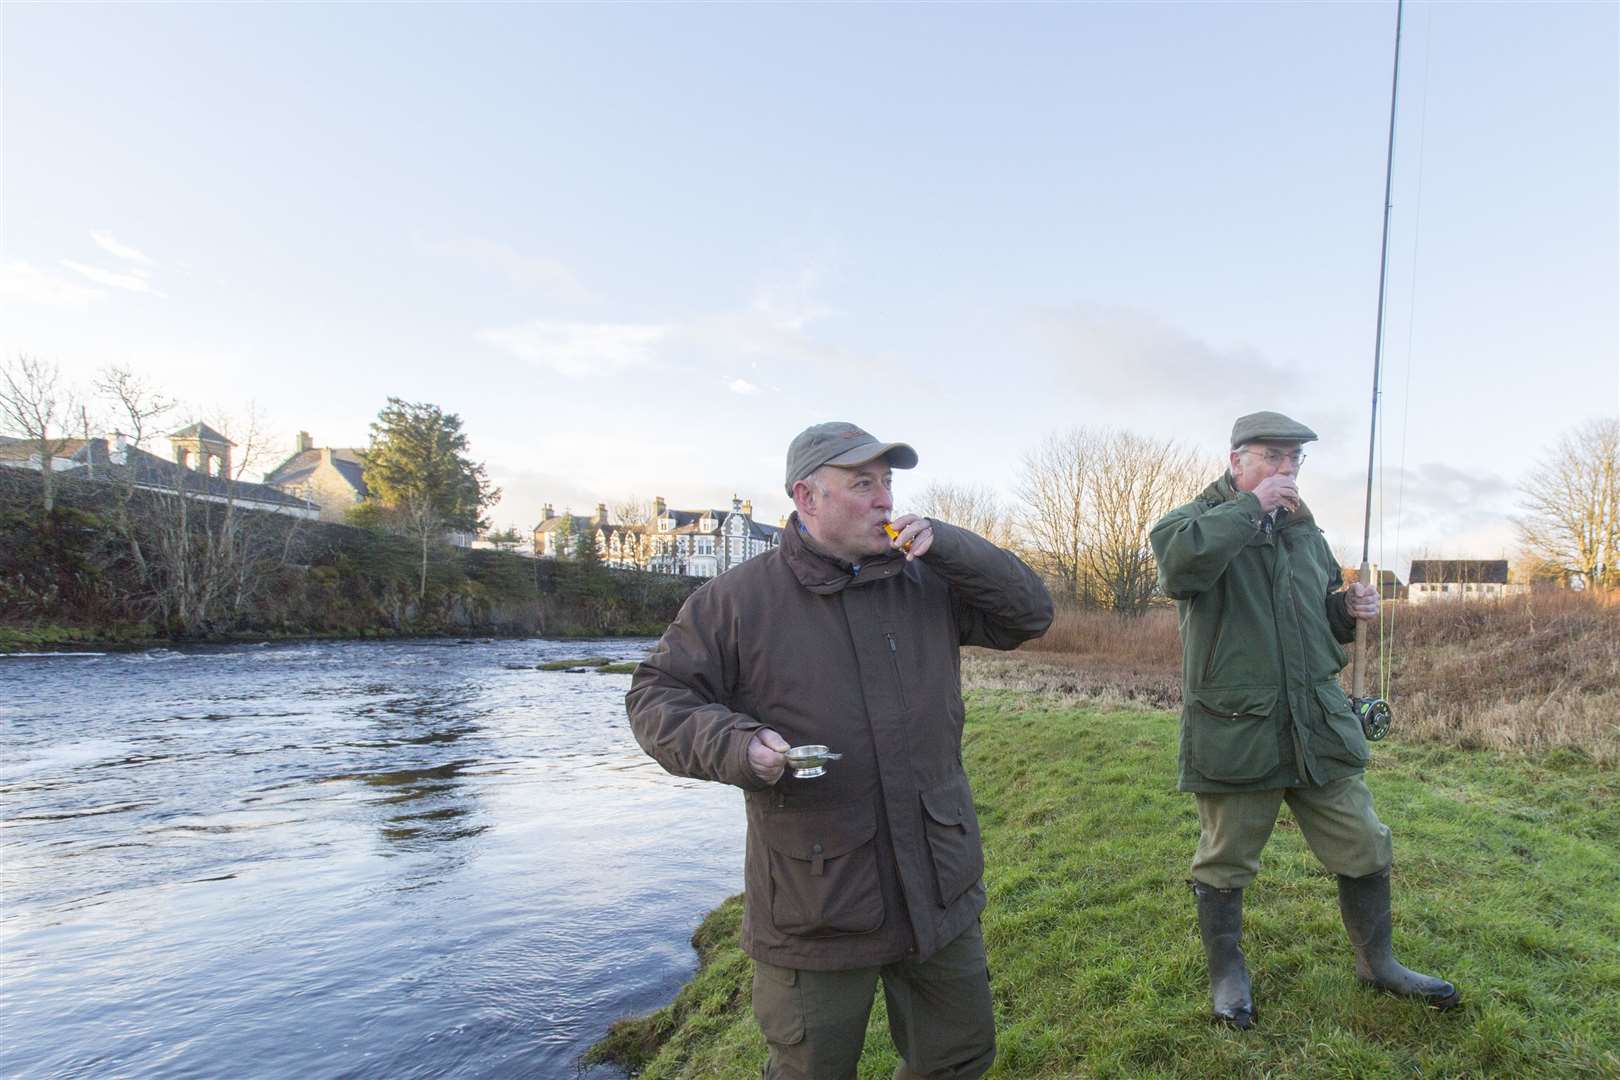 John Drummond (left), estate manager for Thurso River Ltd, proposes a toast to the salmon season on the river along with Francis Sandison, who cast the first fly. Picture: Robert MacDonald / Northern Studios